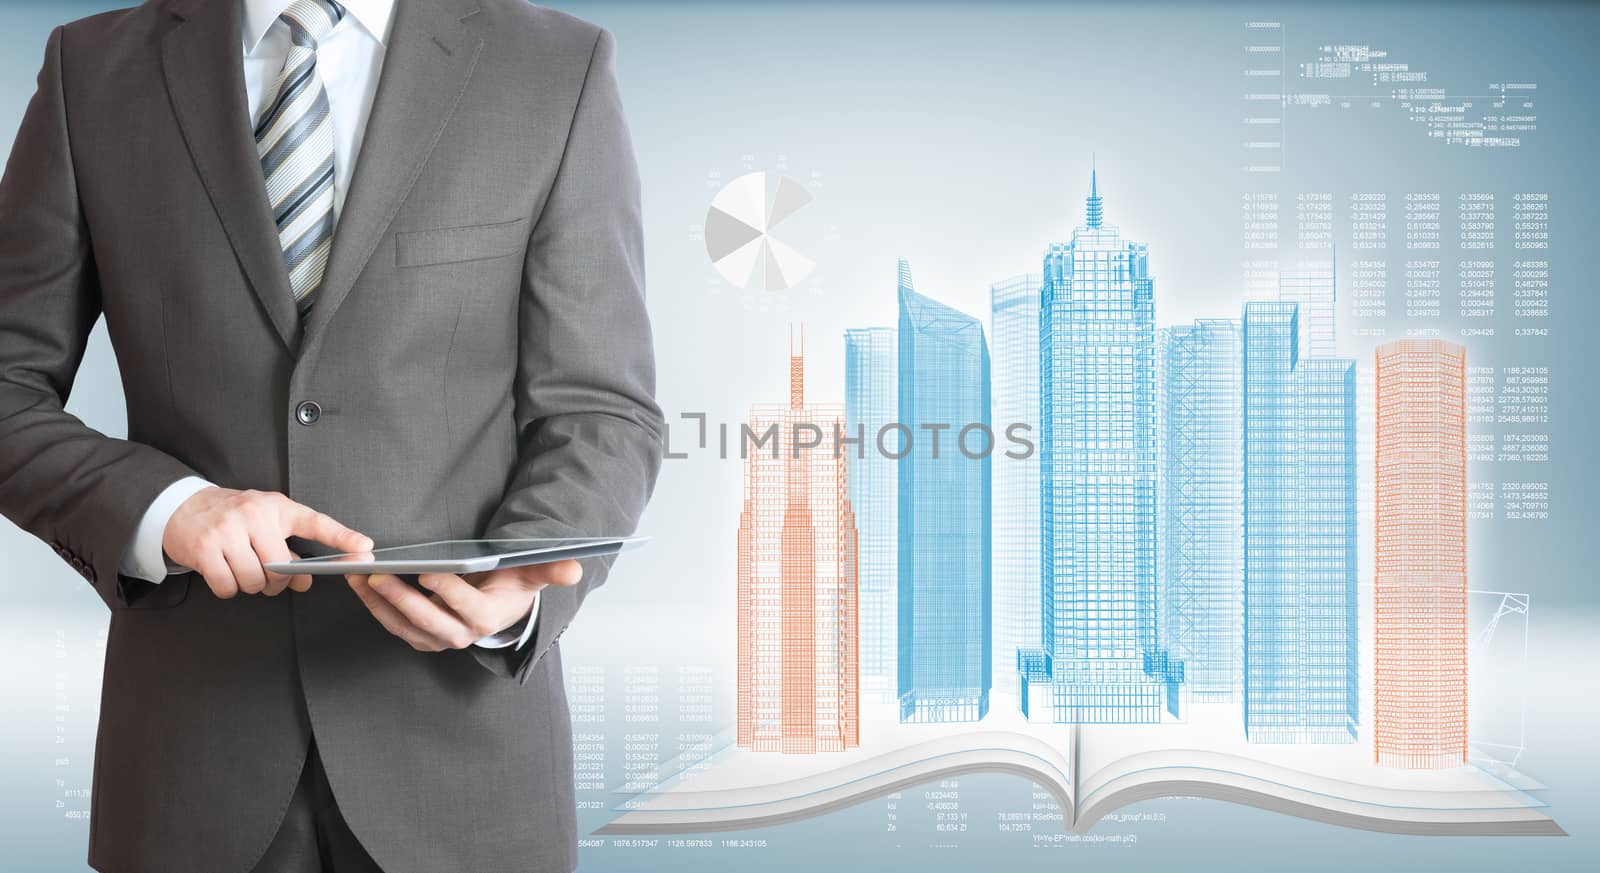 Businessman holding tablet pc. On background of the high-tech wire frame skyscrapers and graphs